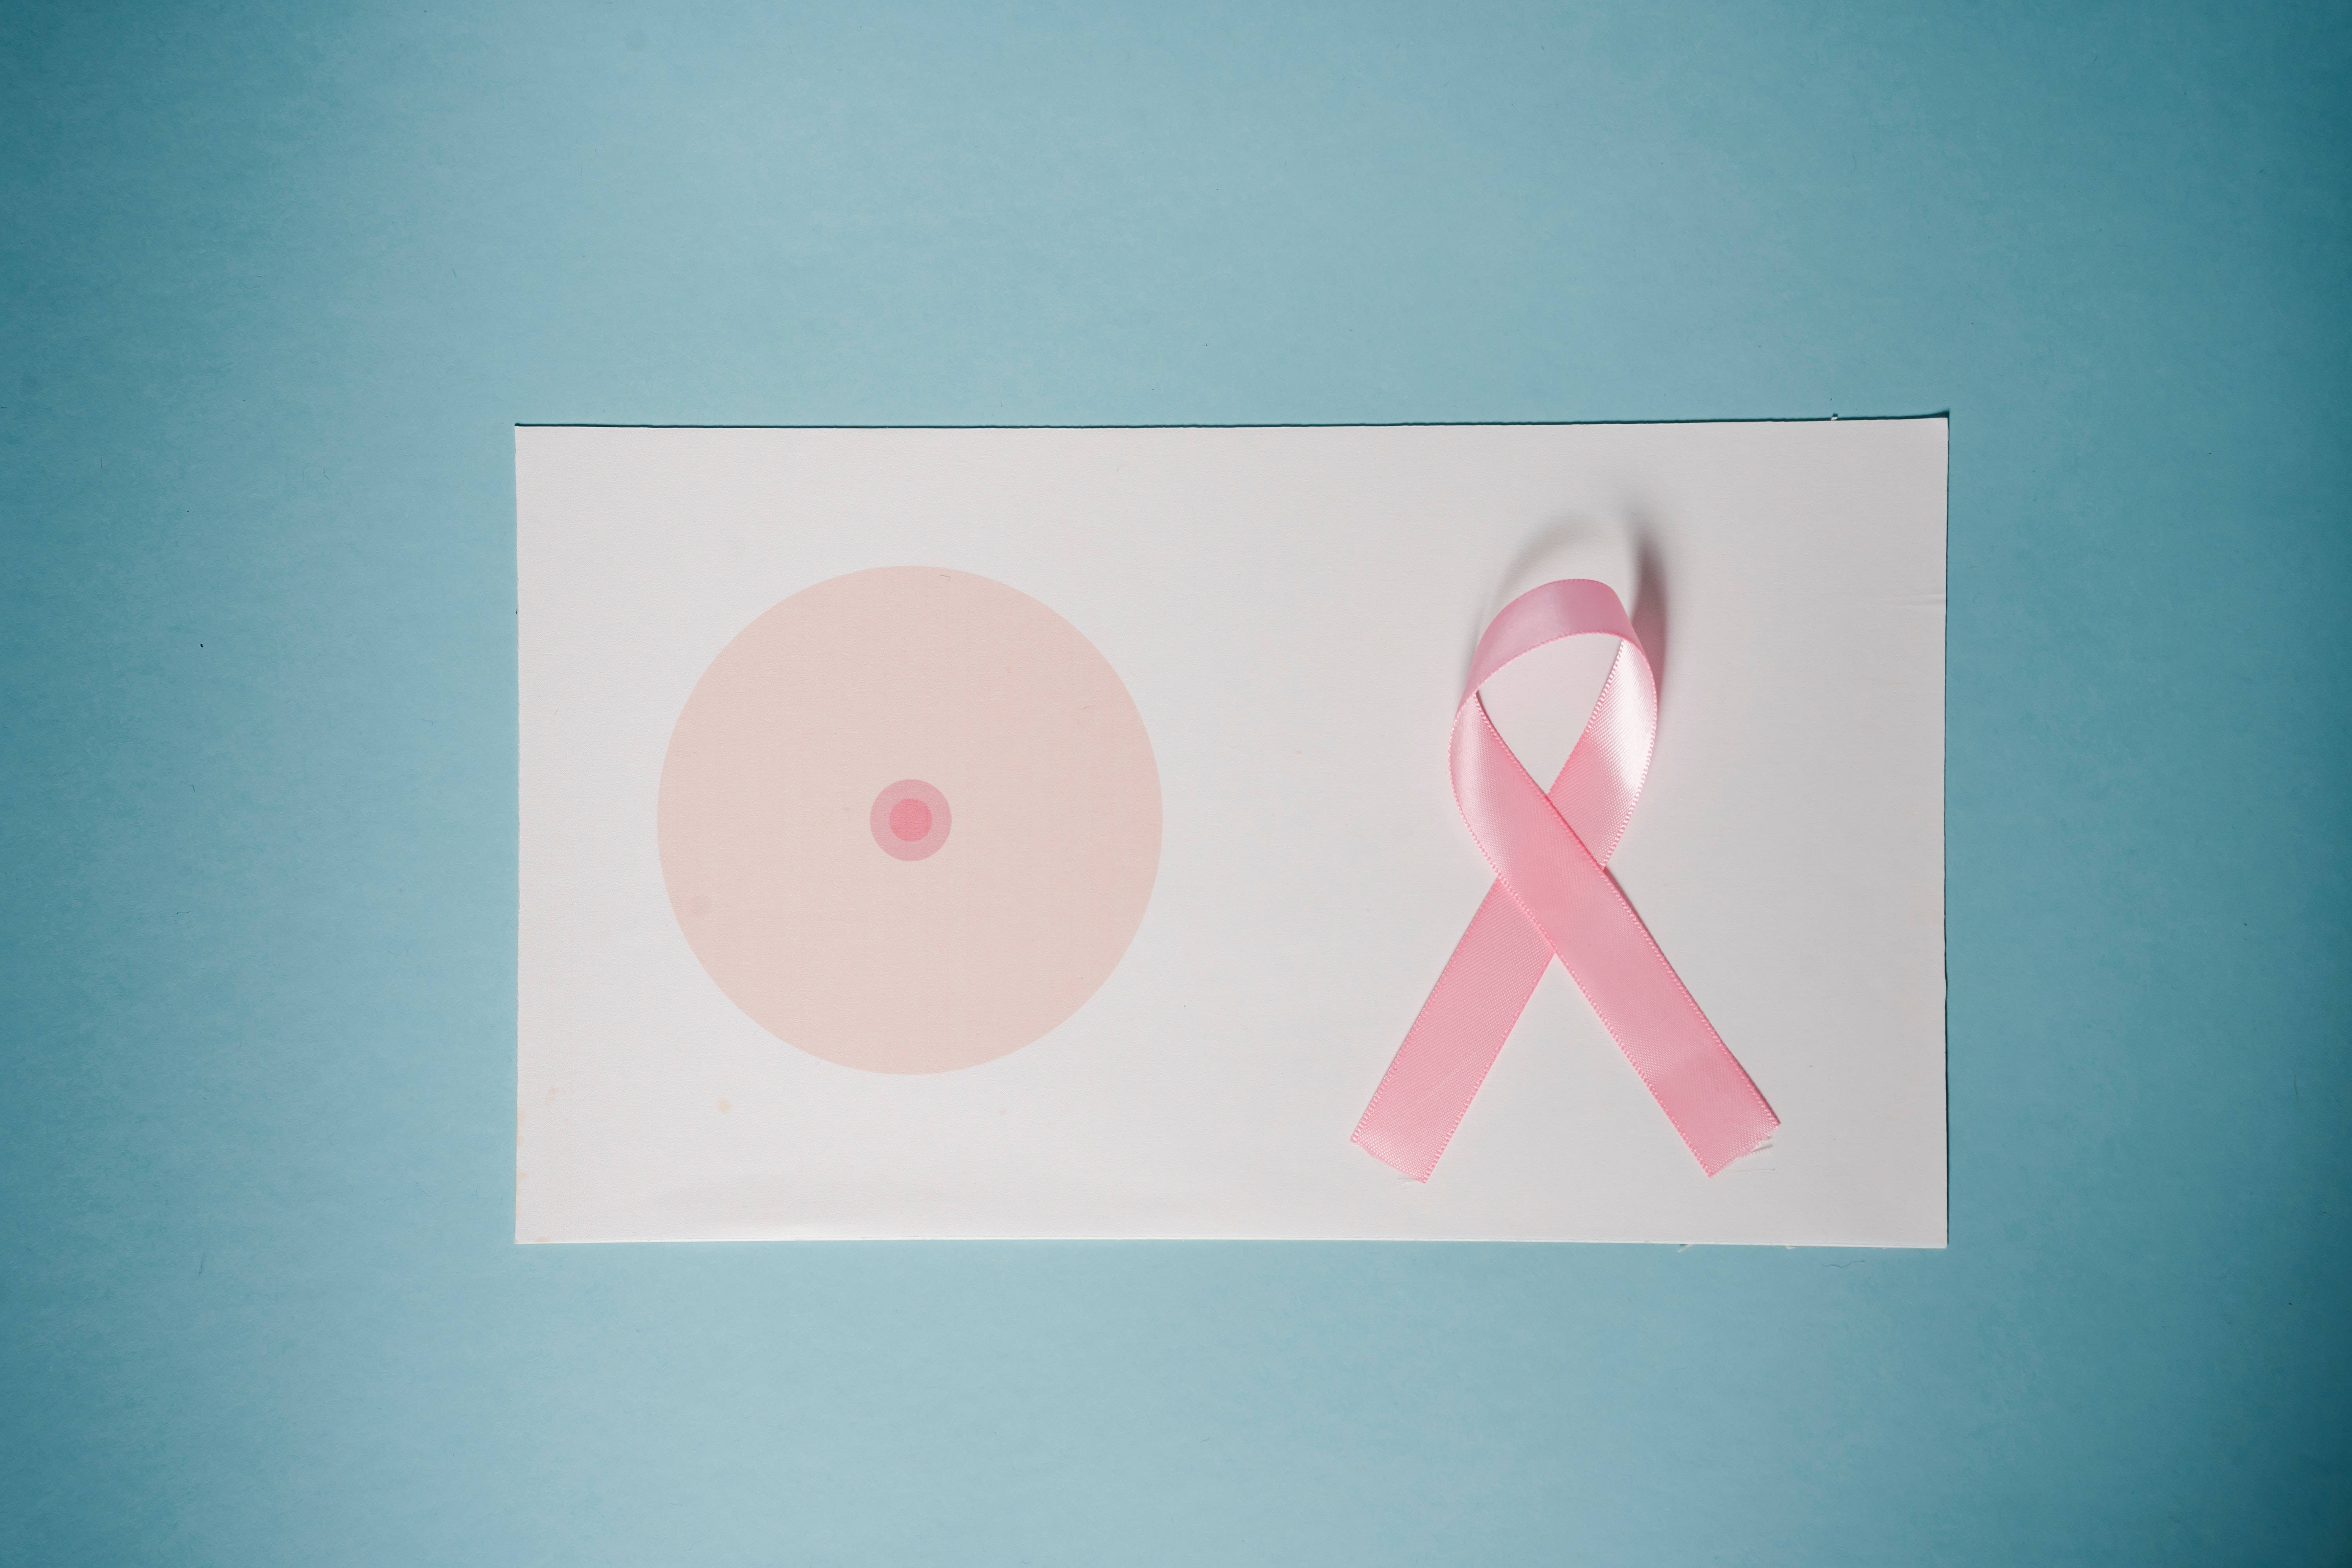 TomboyX: For us, Breast Cancer Awareness Month is personal.